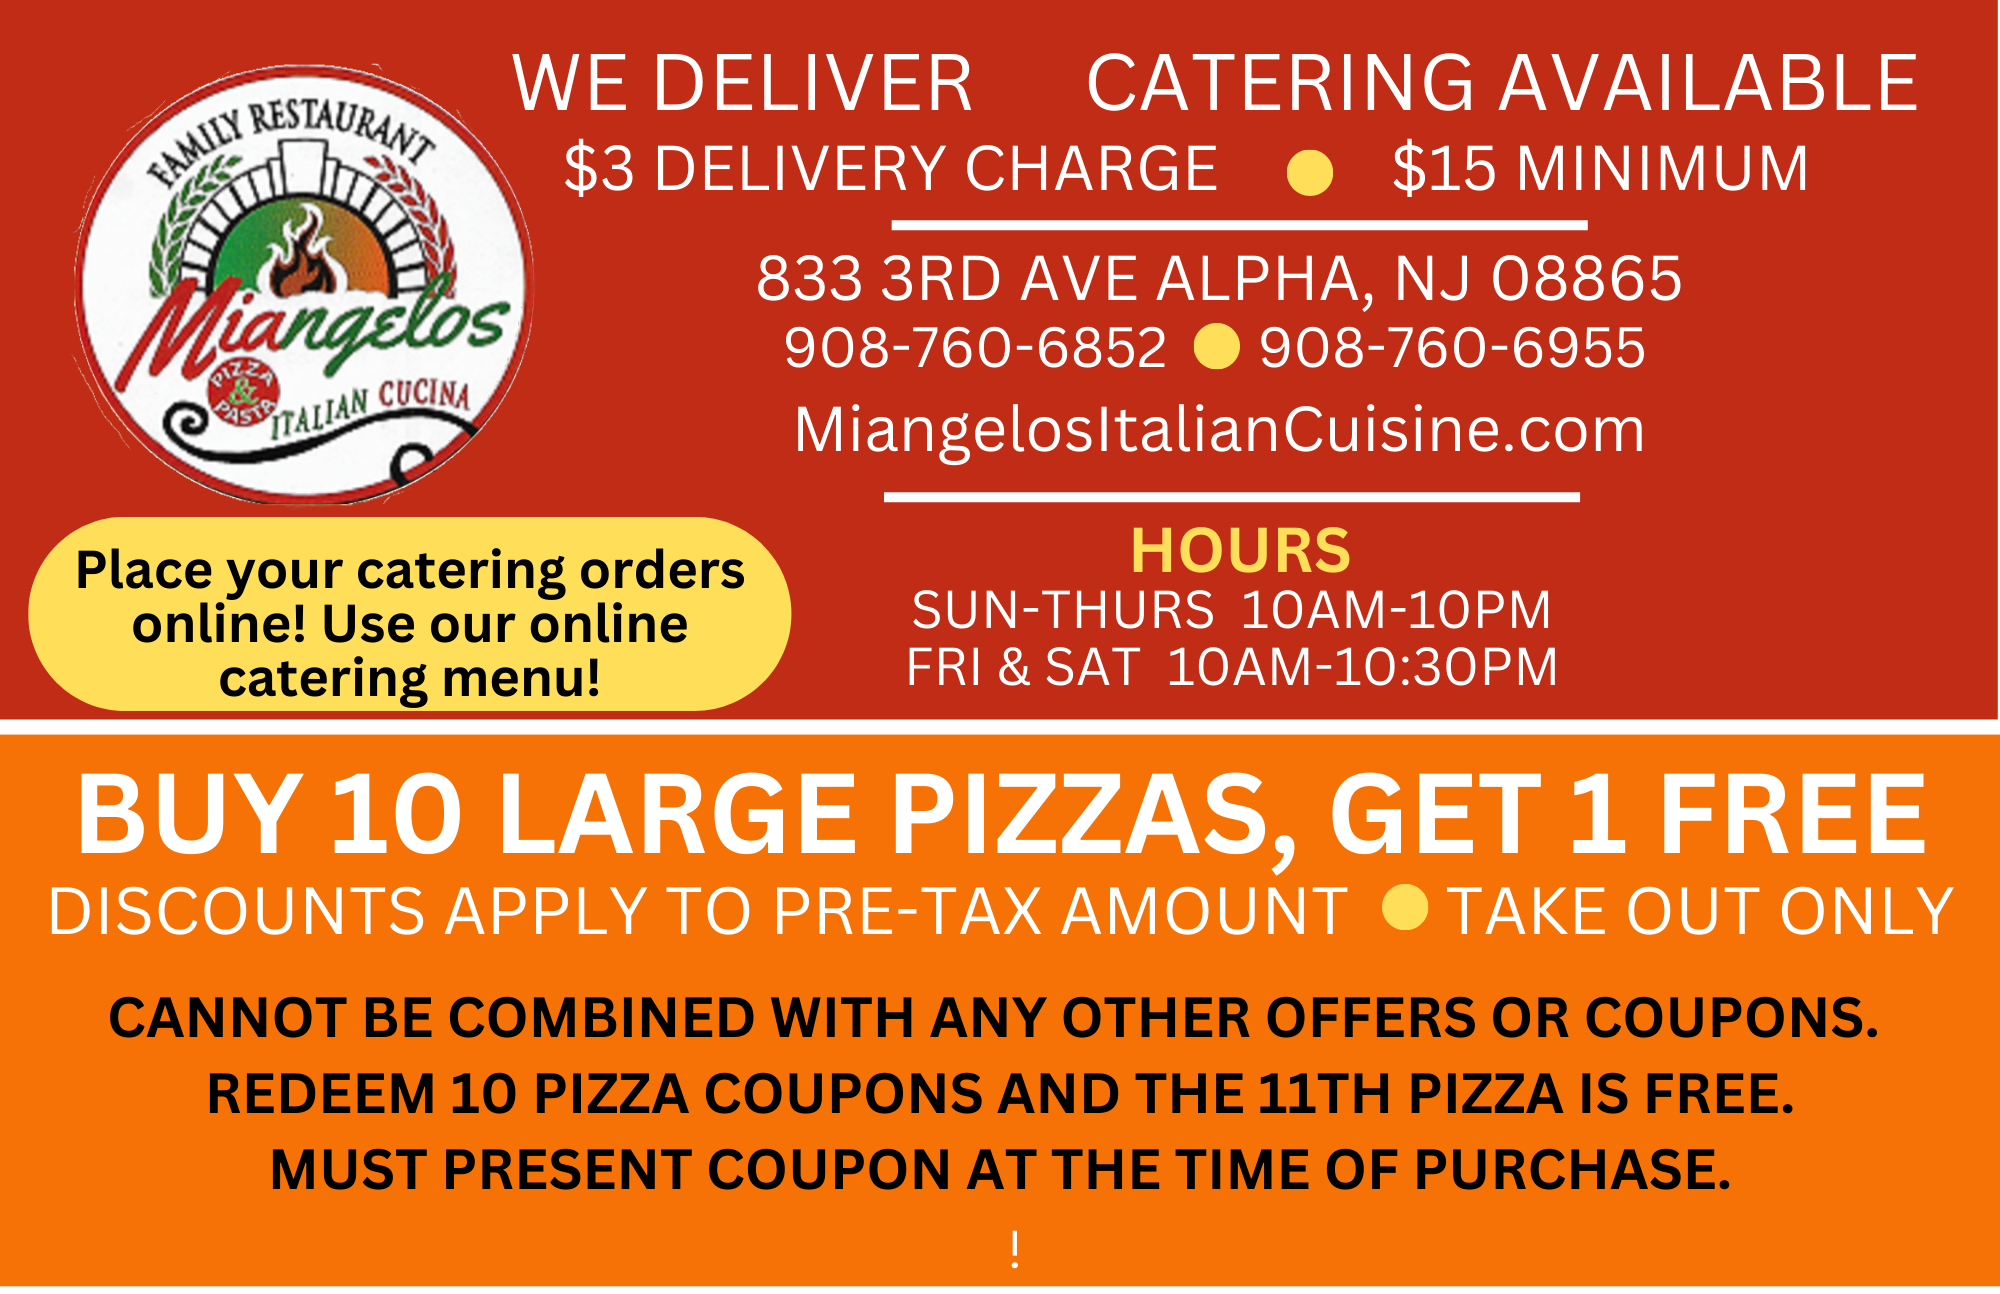 MIANGELOS DELIVERY CATERING 2 3 23